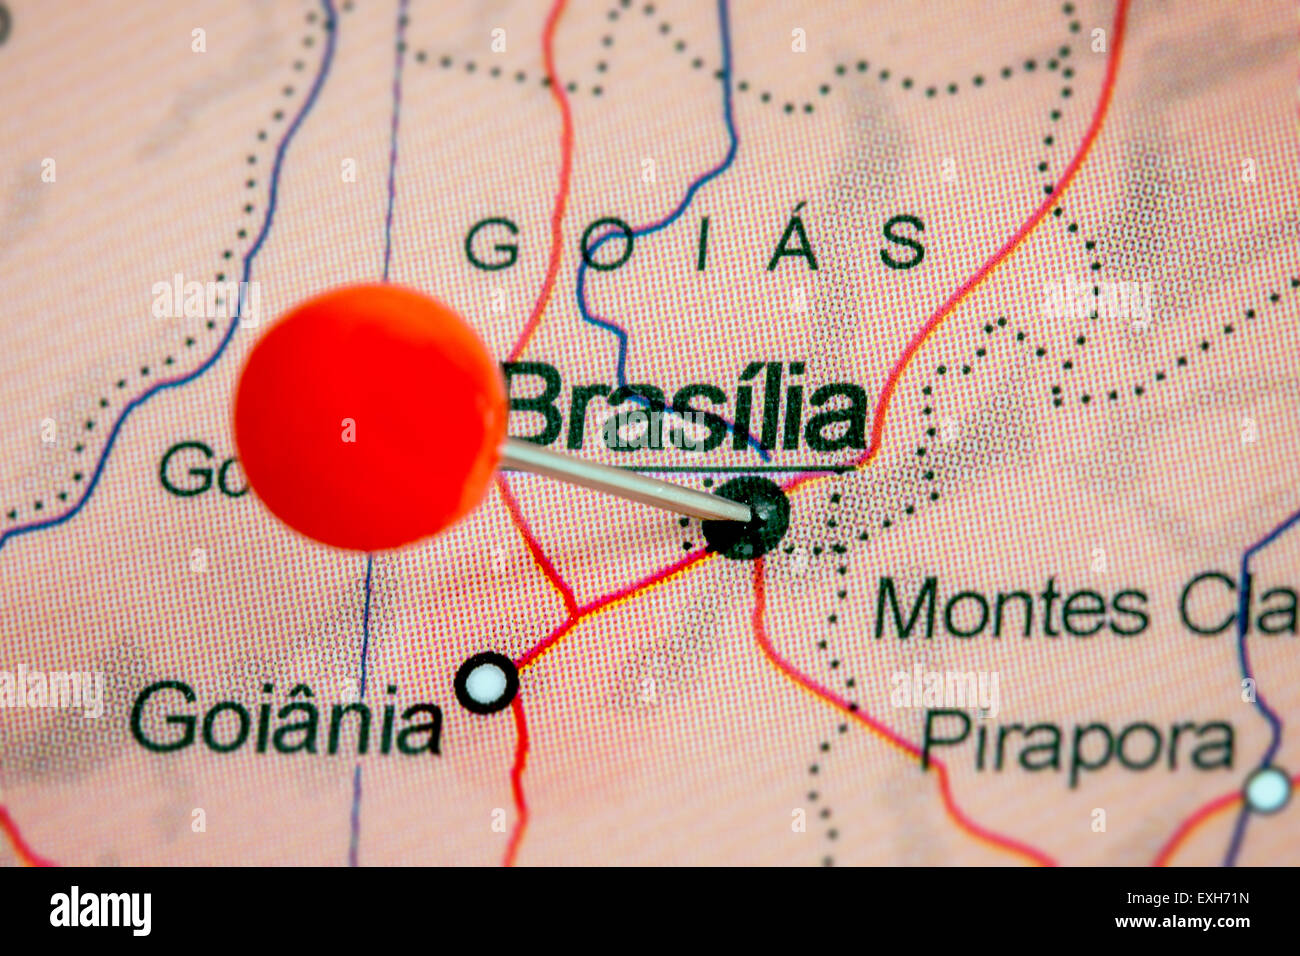 Close-up of a red pushpin on a map of Brasilia, Brazil Stock Photo